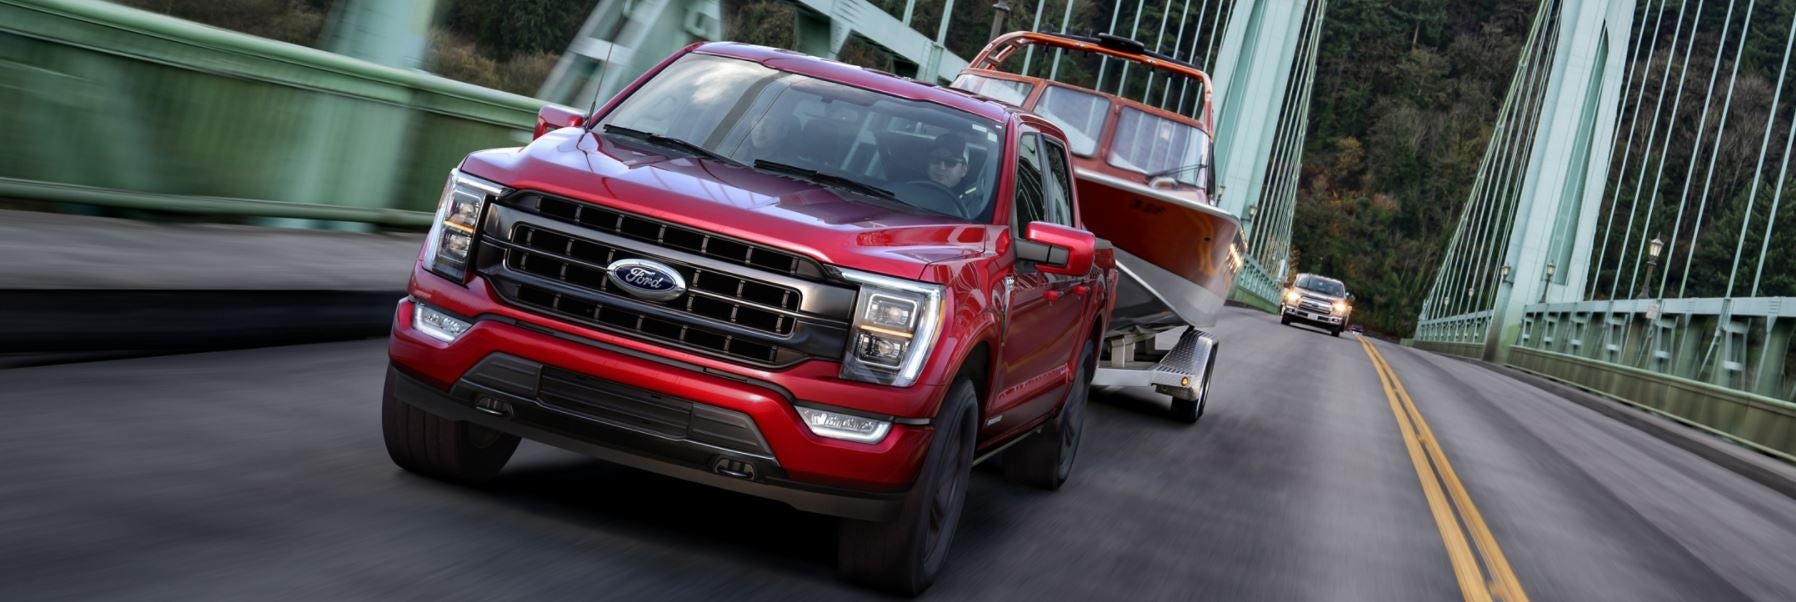 2021 Ford F-150s For Sale